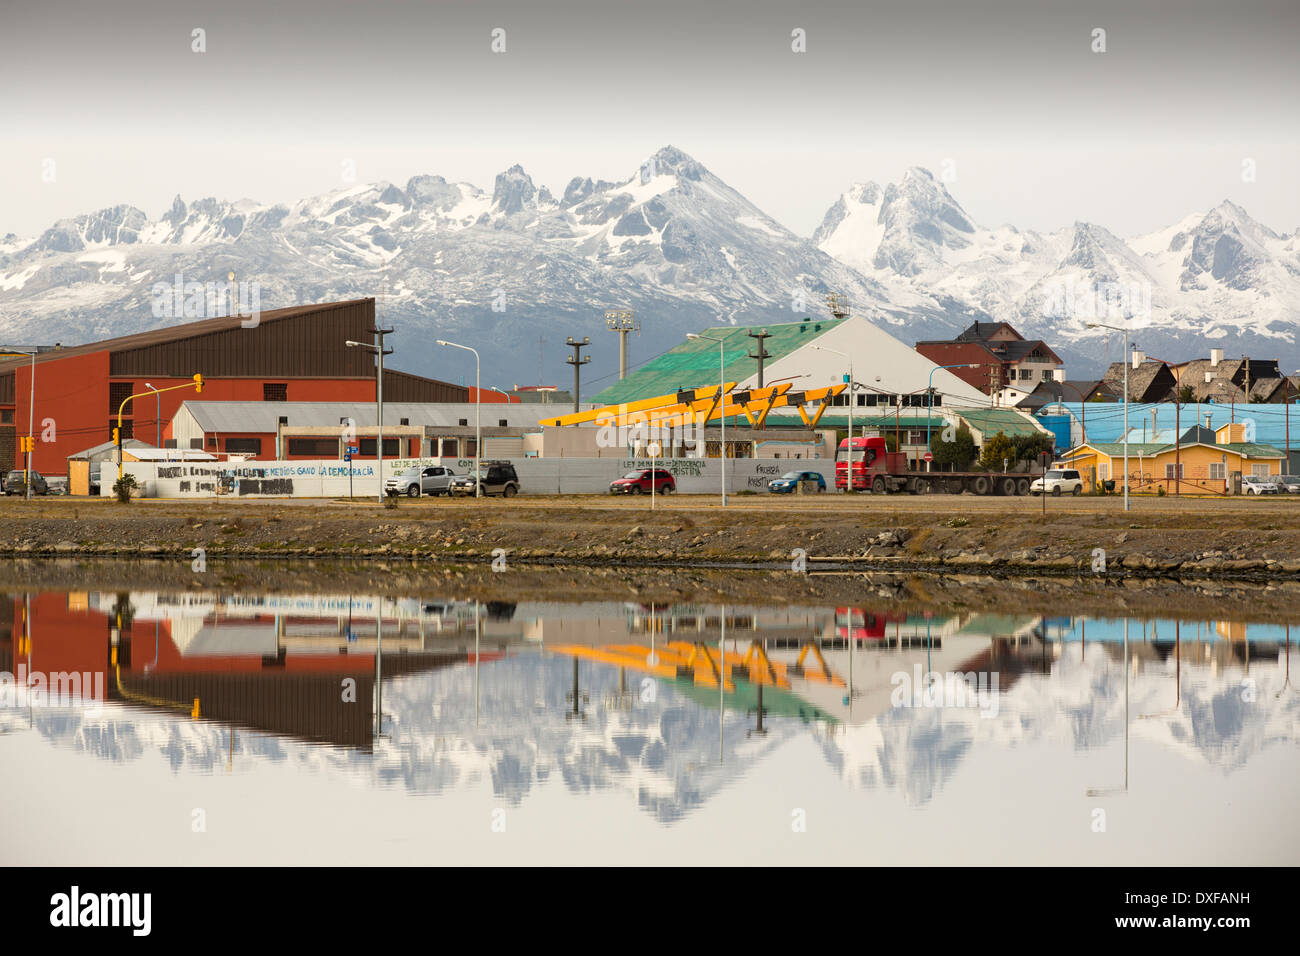 The Martial mountain range from the town of Ushuaia which is the capital of Tierra del Fuego, in Argentina Stock Photo